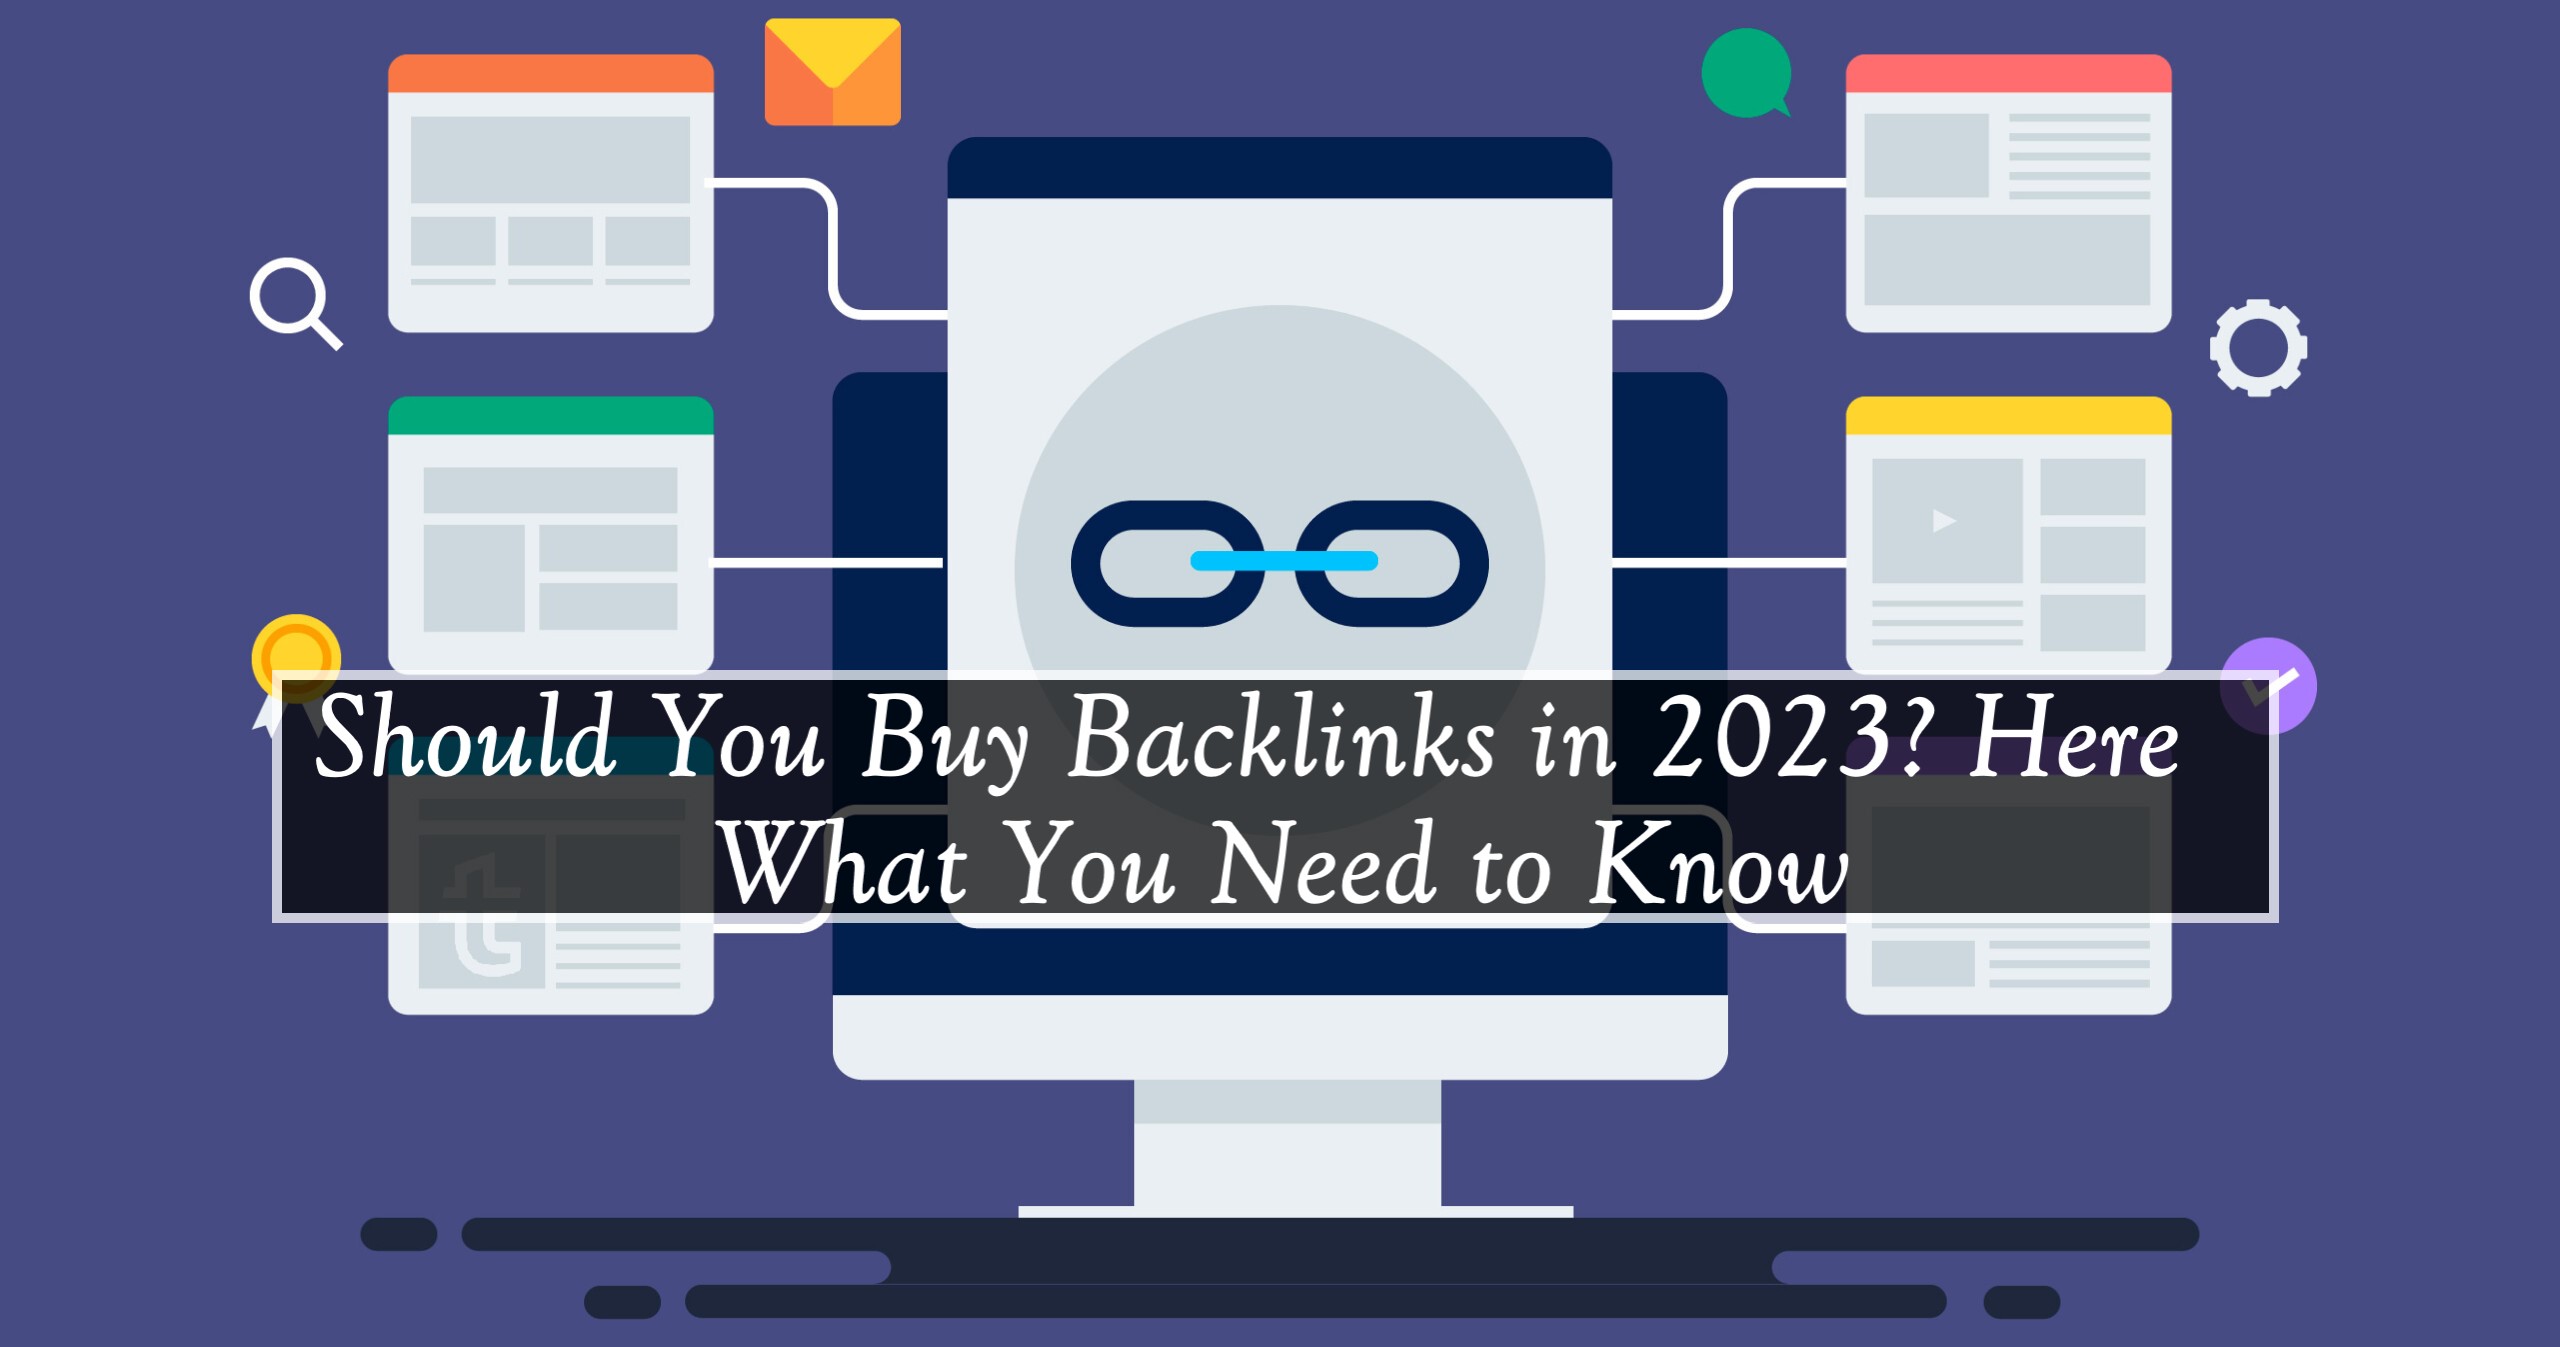 Should You Buy Backlinks in 2023? Here’s What You Need to Know